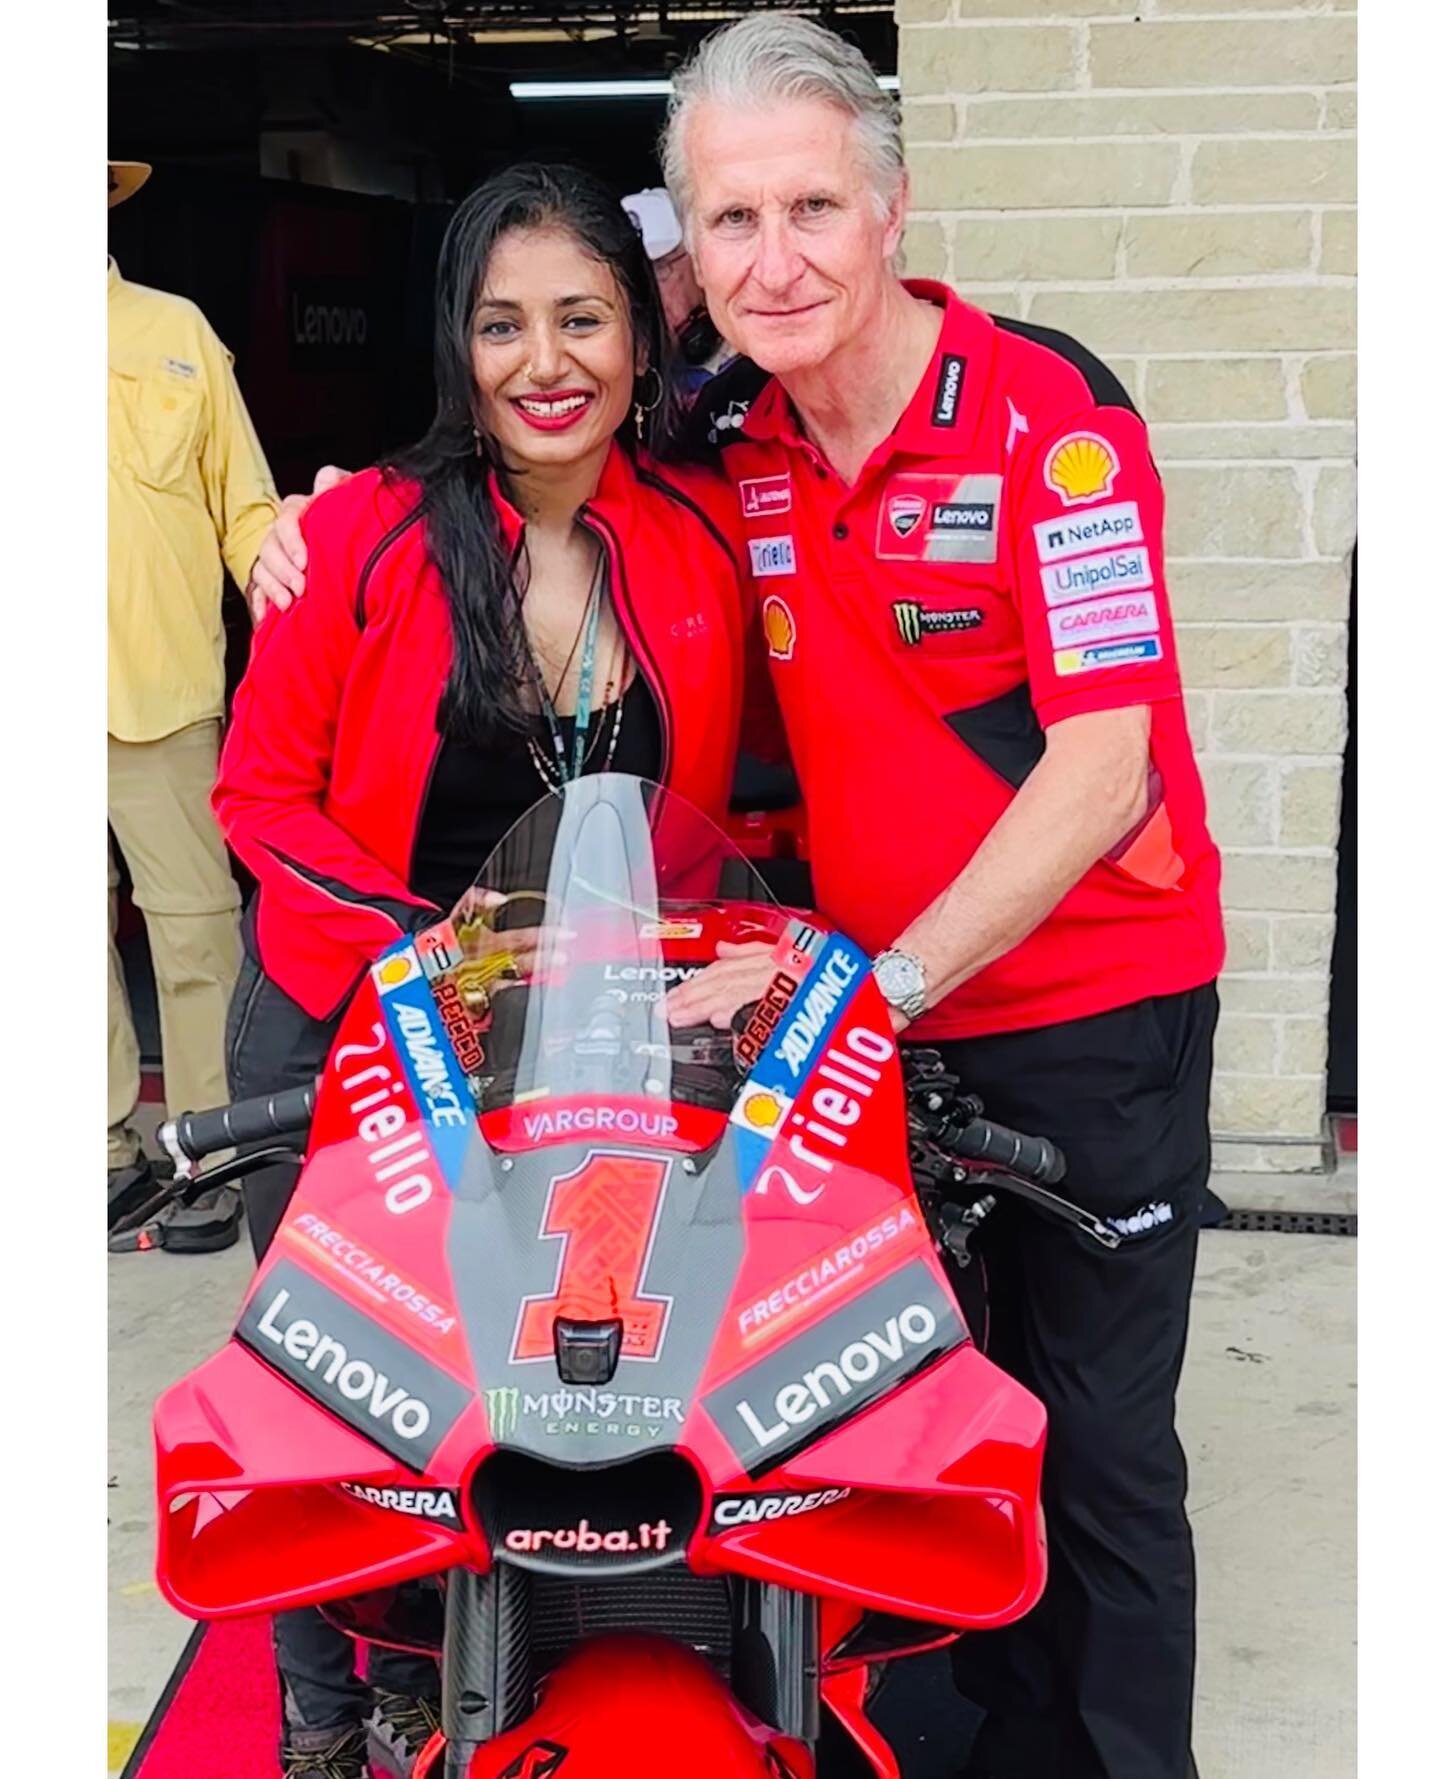 🇮🇹 + 🇧🇩 heat!🥰 Thank you Paolo @paolociabatti &amp; Ducati @ducaticorse family for your gracious hospitality and care + so much fun on the paddock‼️

Slide 2: Legendary Eraldo Ferracci vibing strong 85 years young 🙏🏾❤️✨

🏁: #behindthescenes f